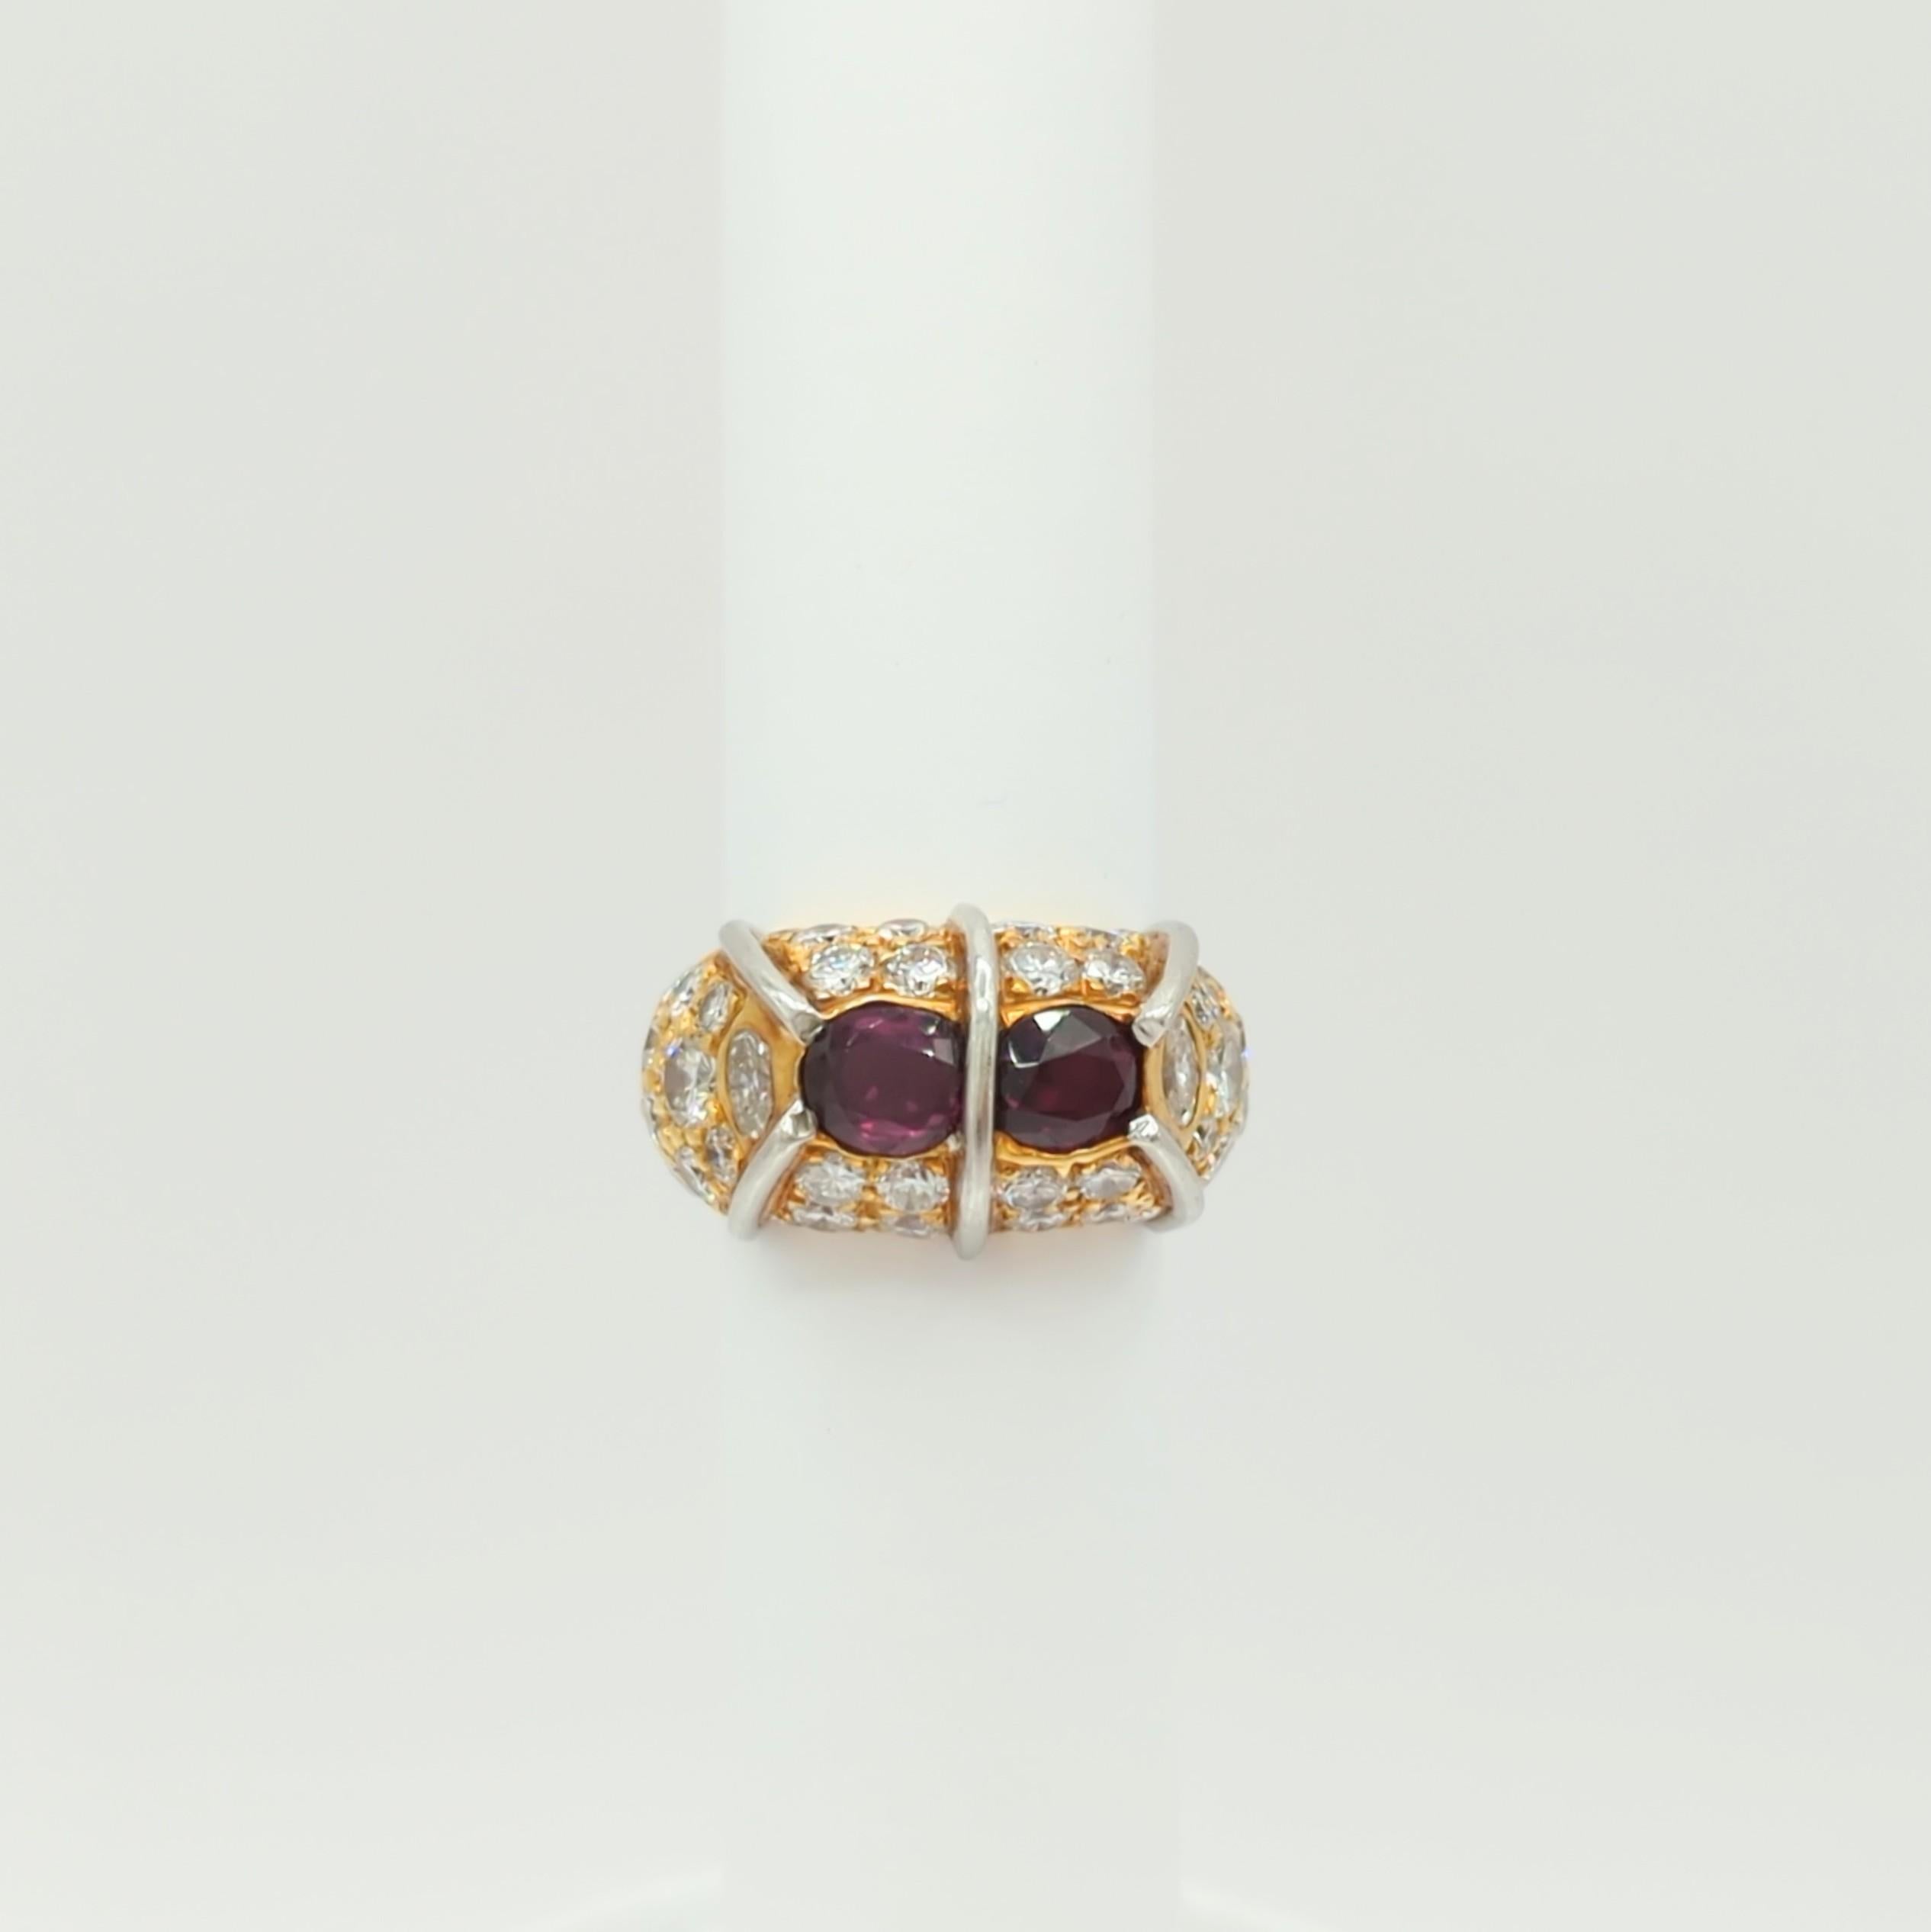 Oval Cut Pink Tourmaline and White Diamond Ring in 18K Yellow Gold & Platinum